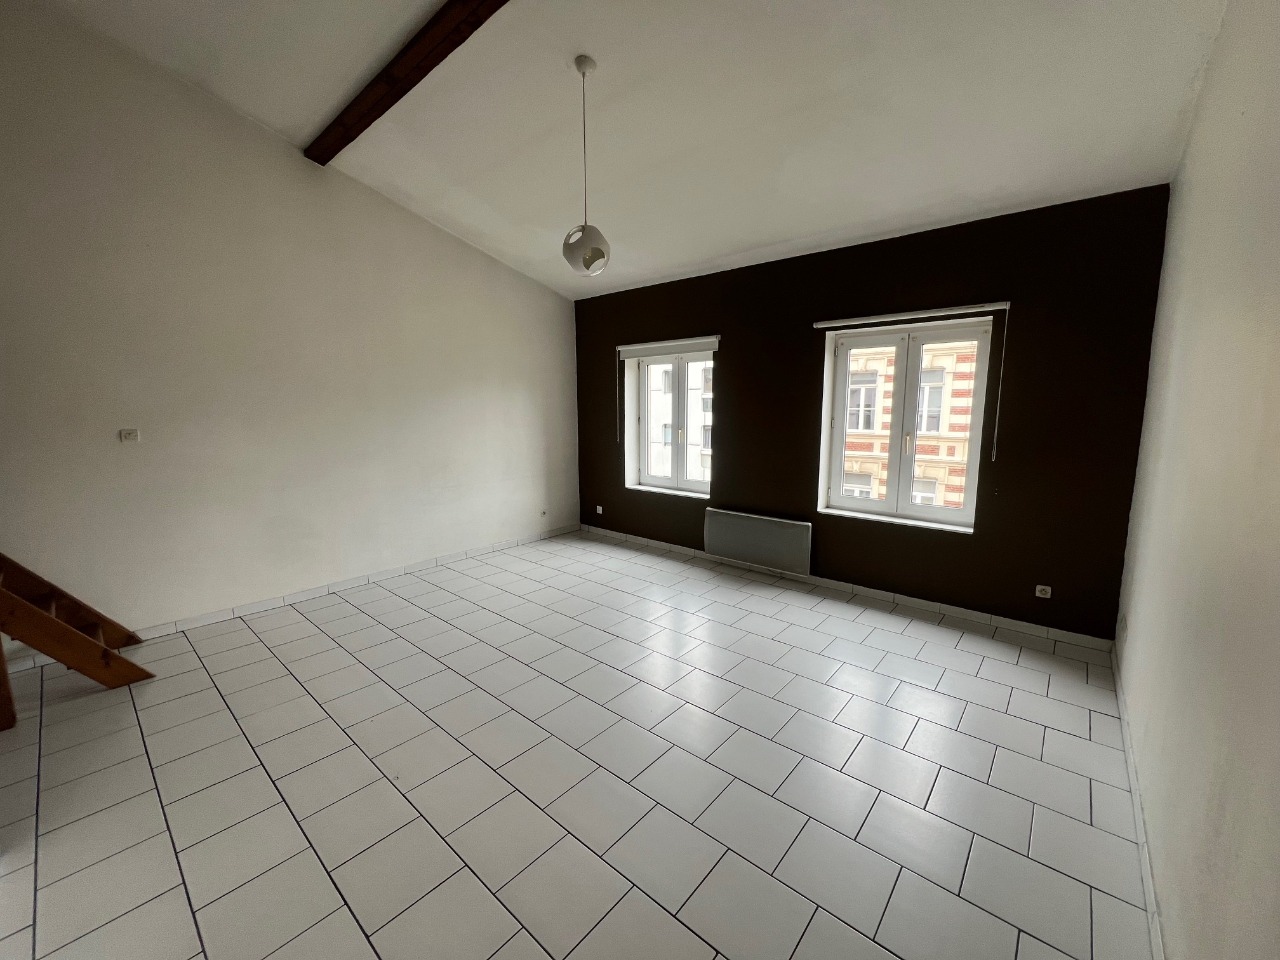 Appartement type 1 bis lille Photo 2 - JLW Immobilier